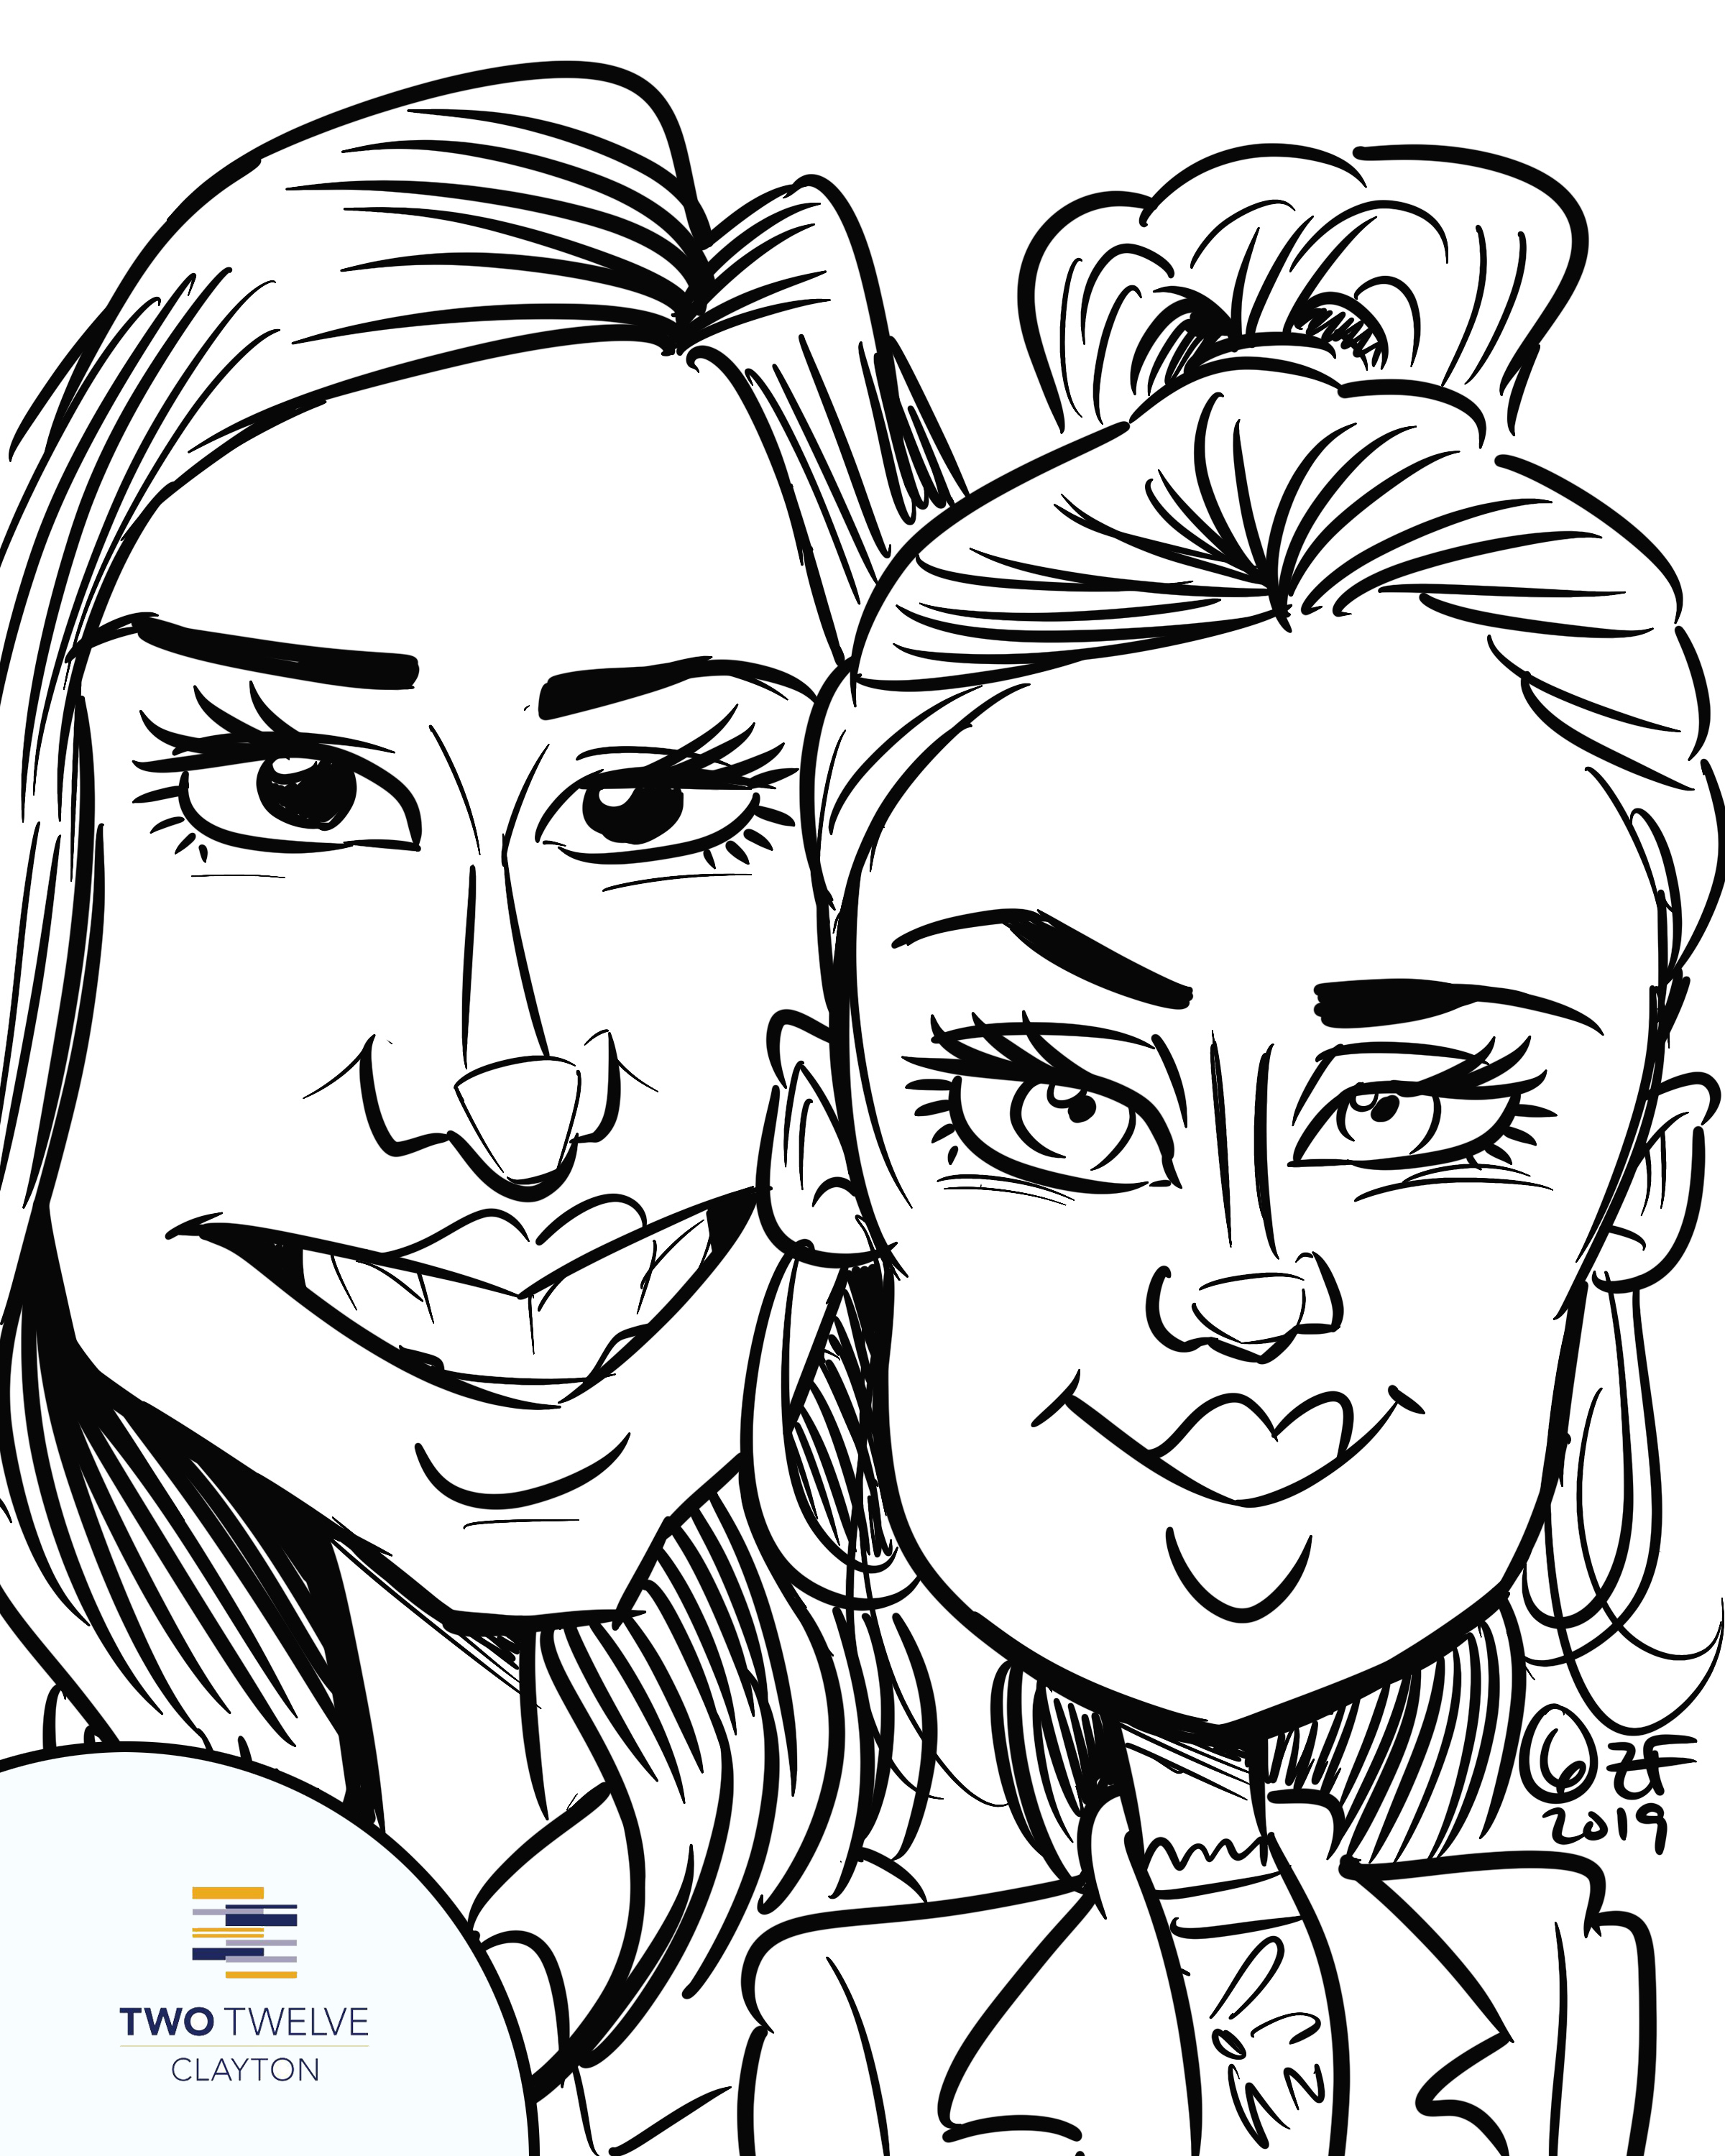 Digital Caricature of girls at Two Twelve Clayton Pool Party, by Bax Illustration